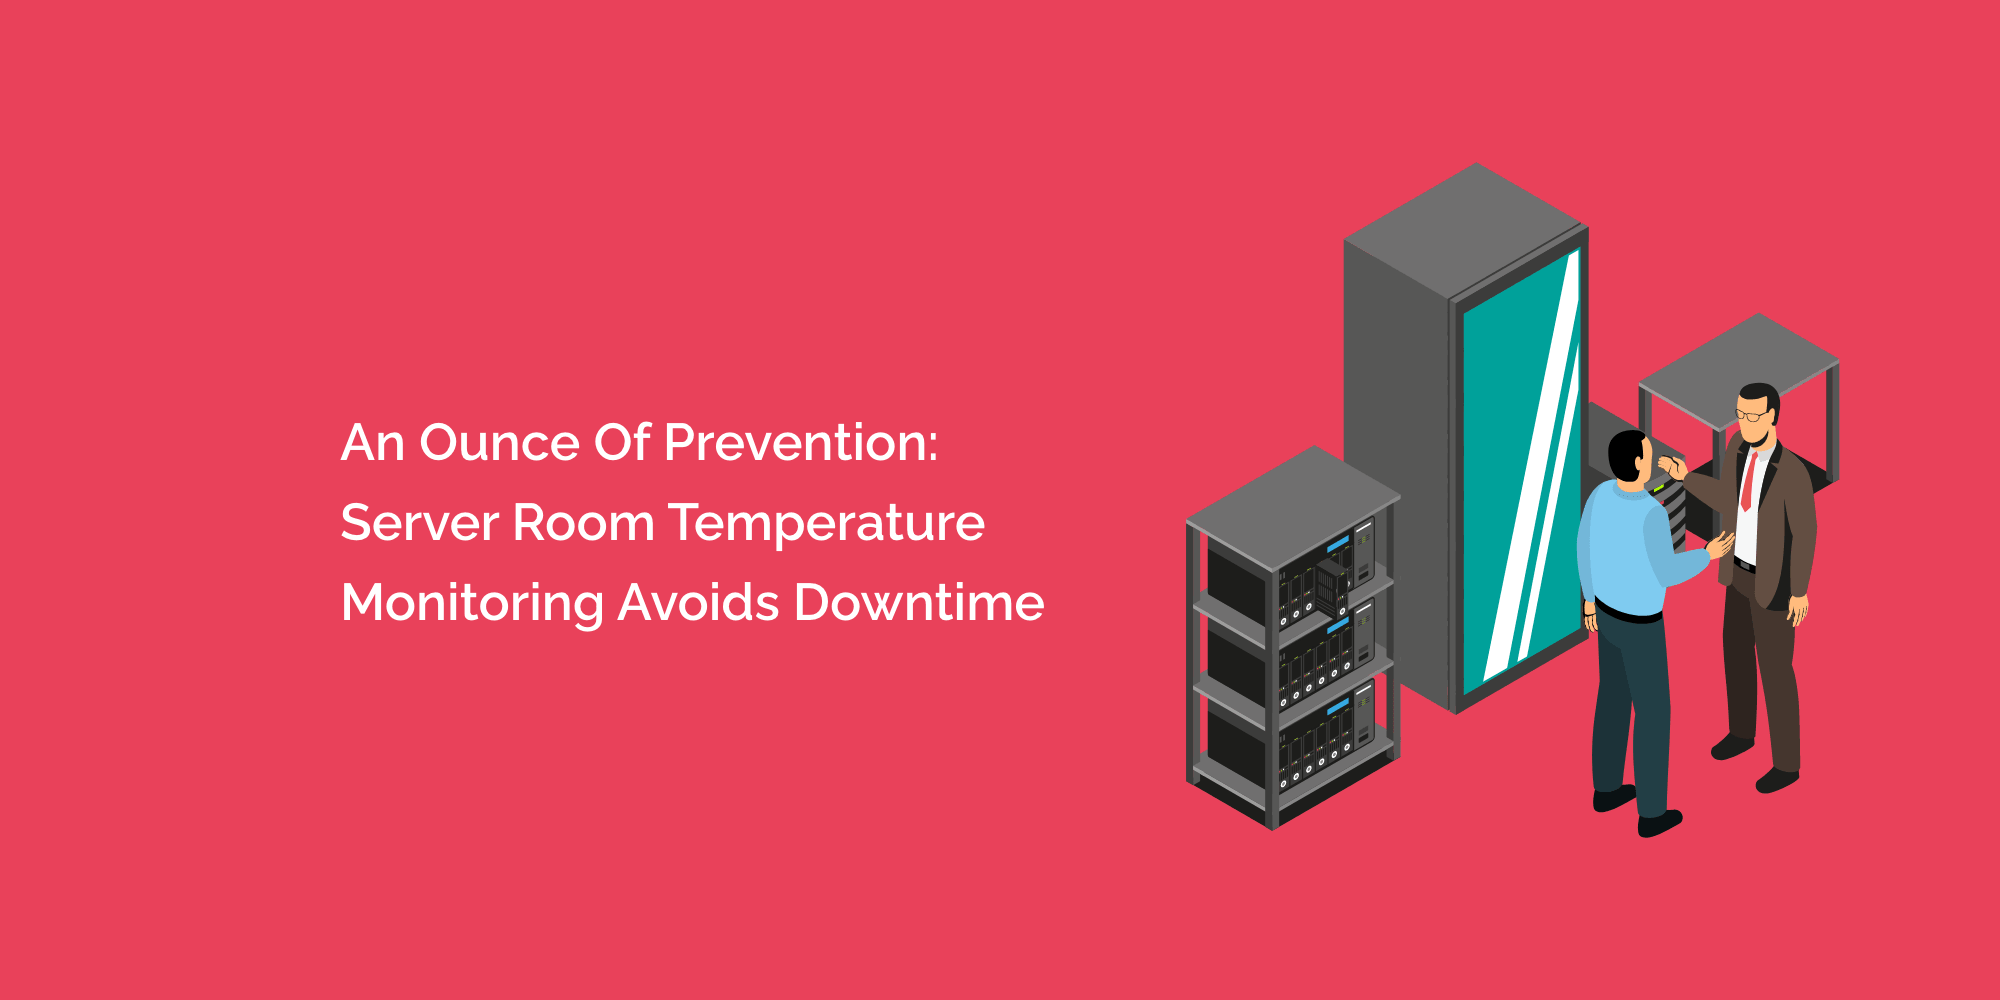 An Ounce of Prevention: Server Room Temperature Monitoring Avoids Downtime